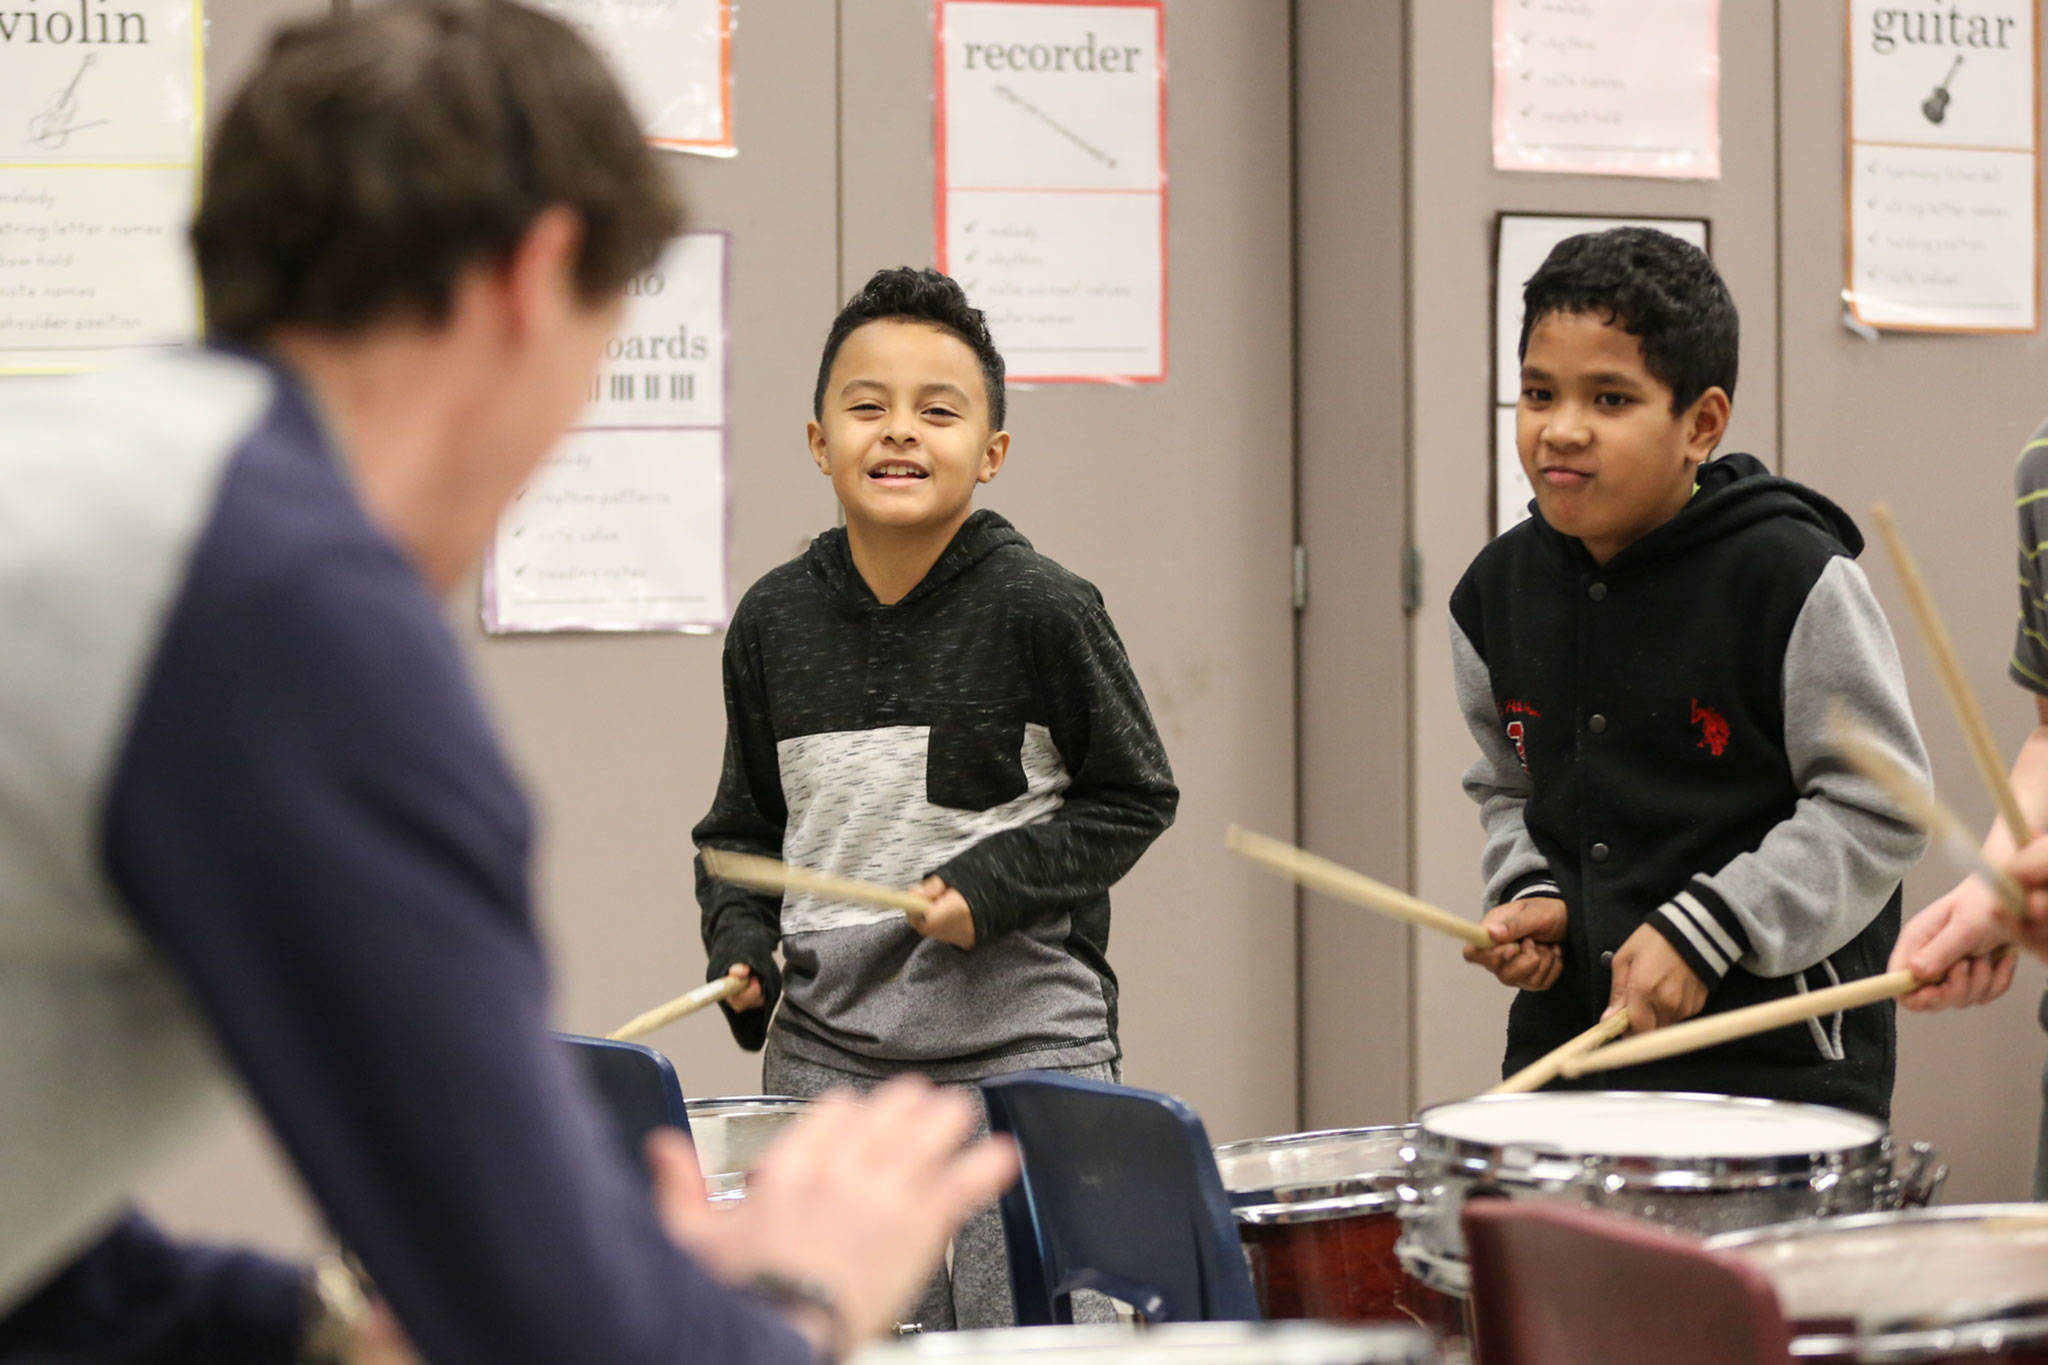 Jayven Nation (center) and Milson Lain follow Pat Jameson’s lead during the Wednesday drum club at Challenger Elementary in Everett. (Kevin Clark / The Herald)